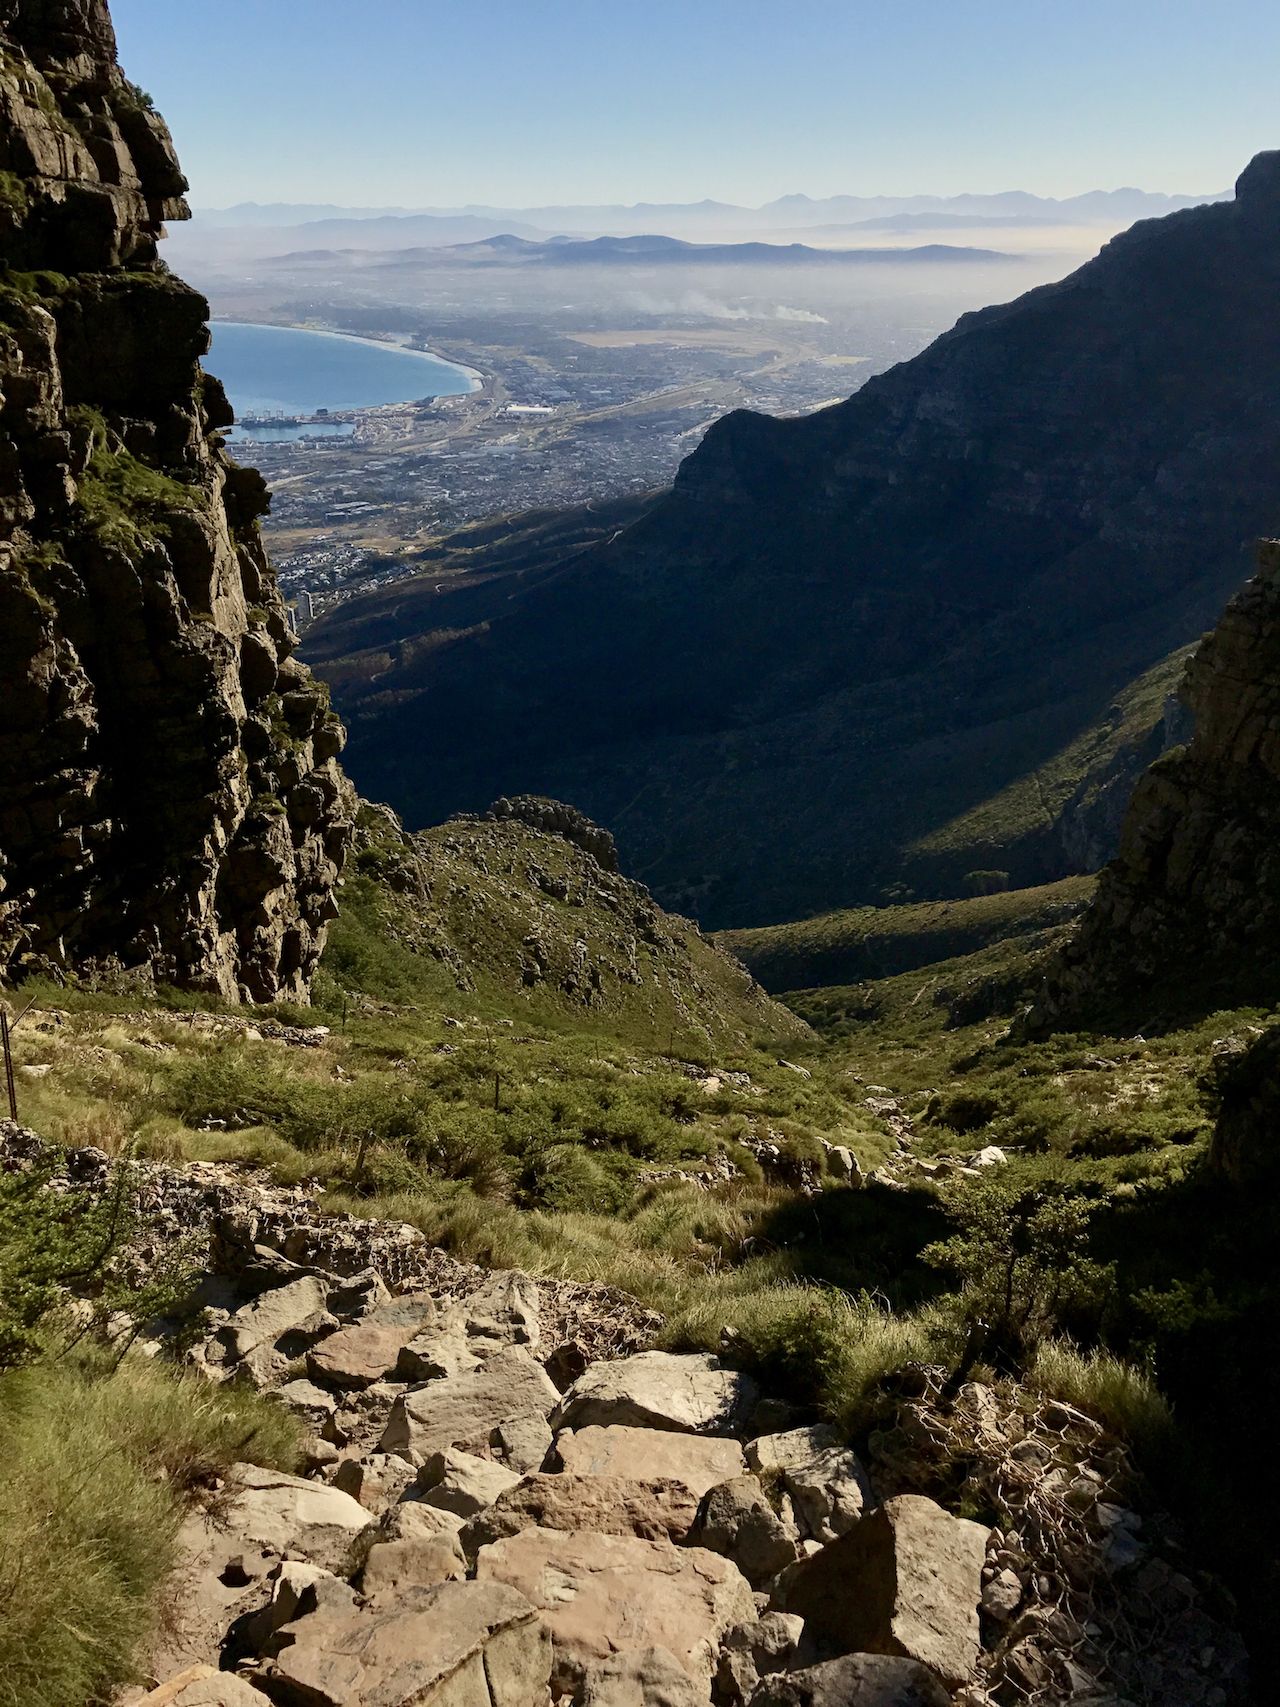 Hiking Table Mountain: the 5 best trails you need to check out